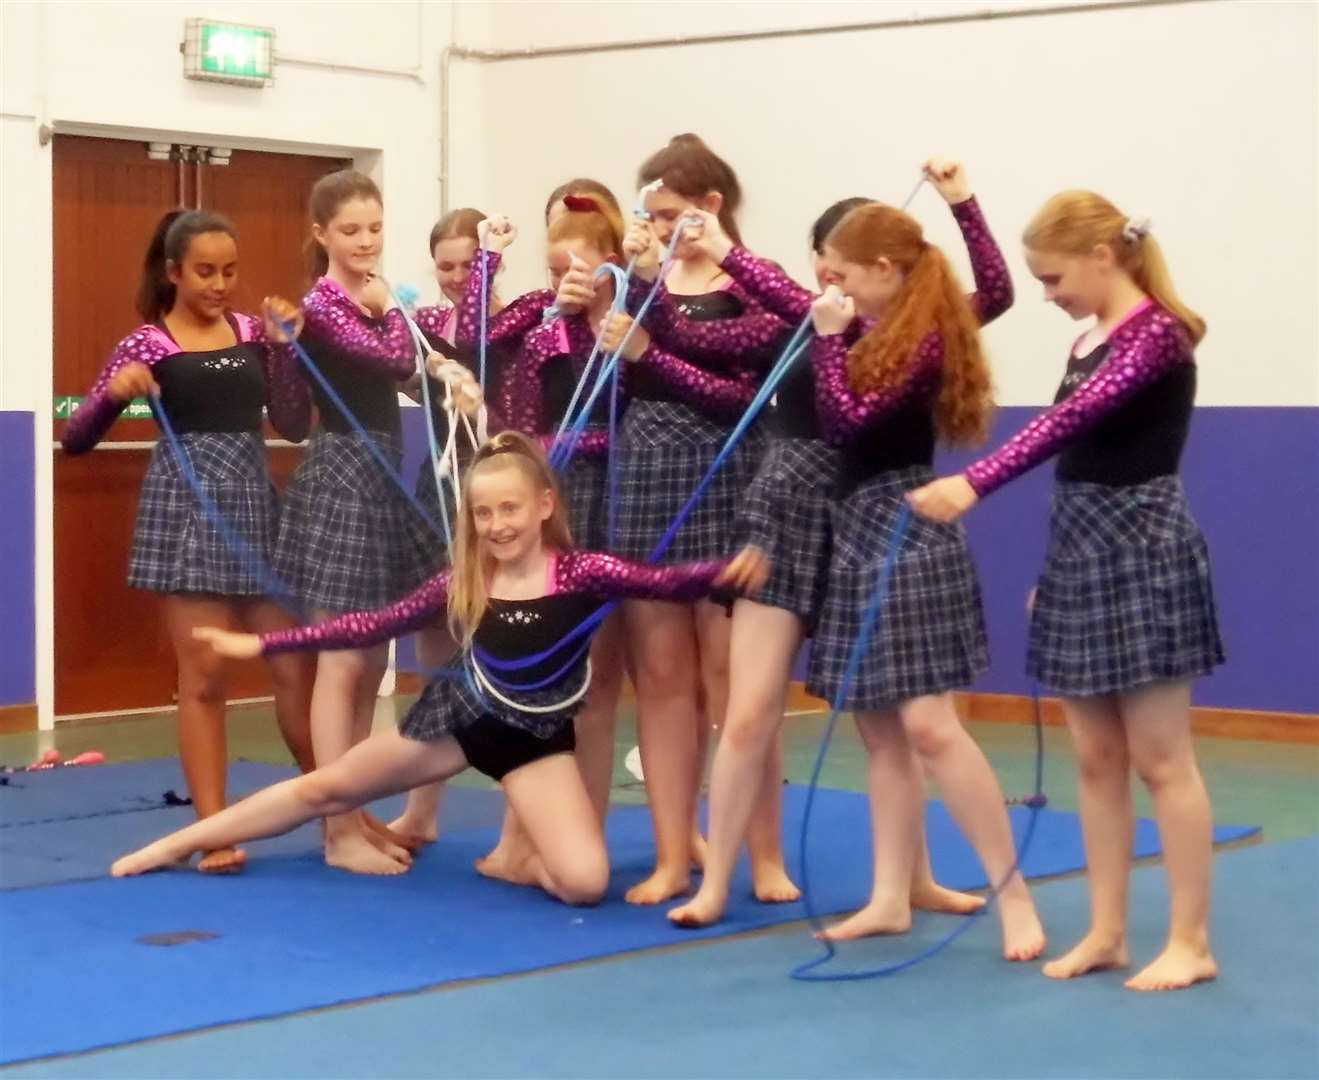 Members of Caithness Rhythmic Gymnastics putting on their display for family and friends.